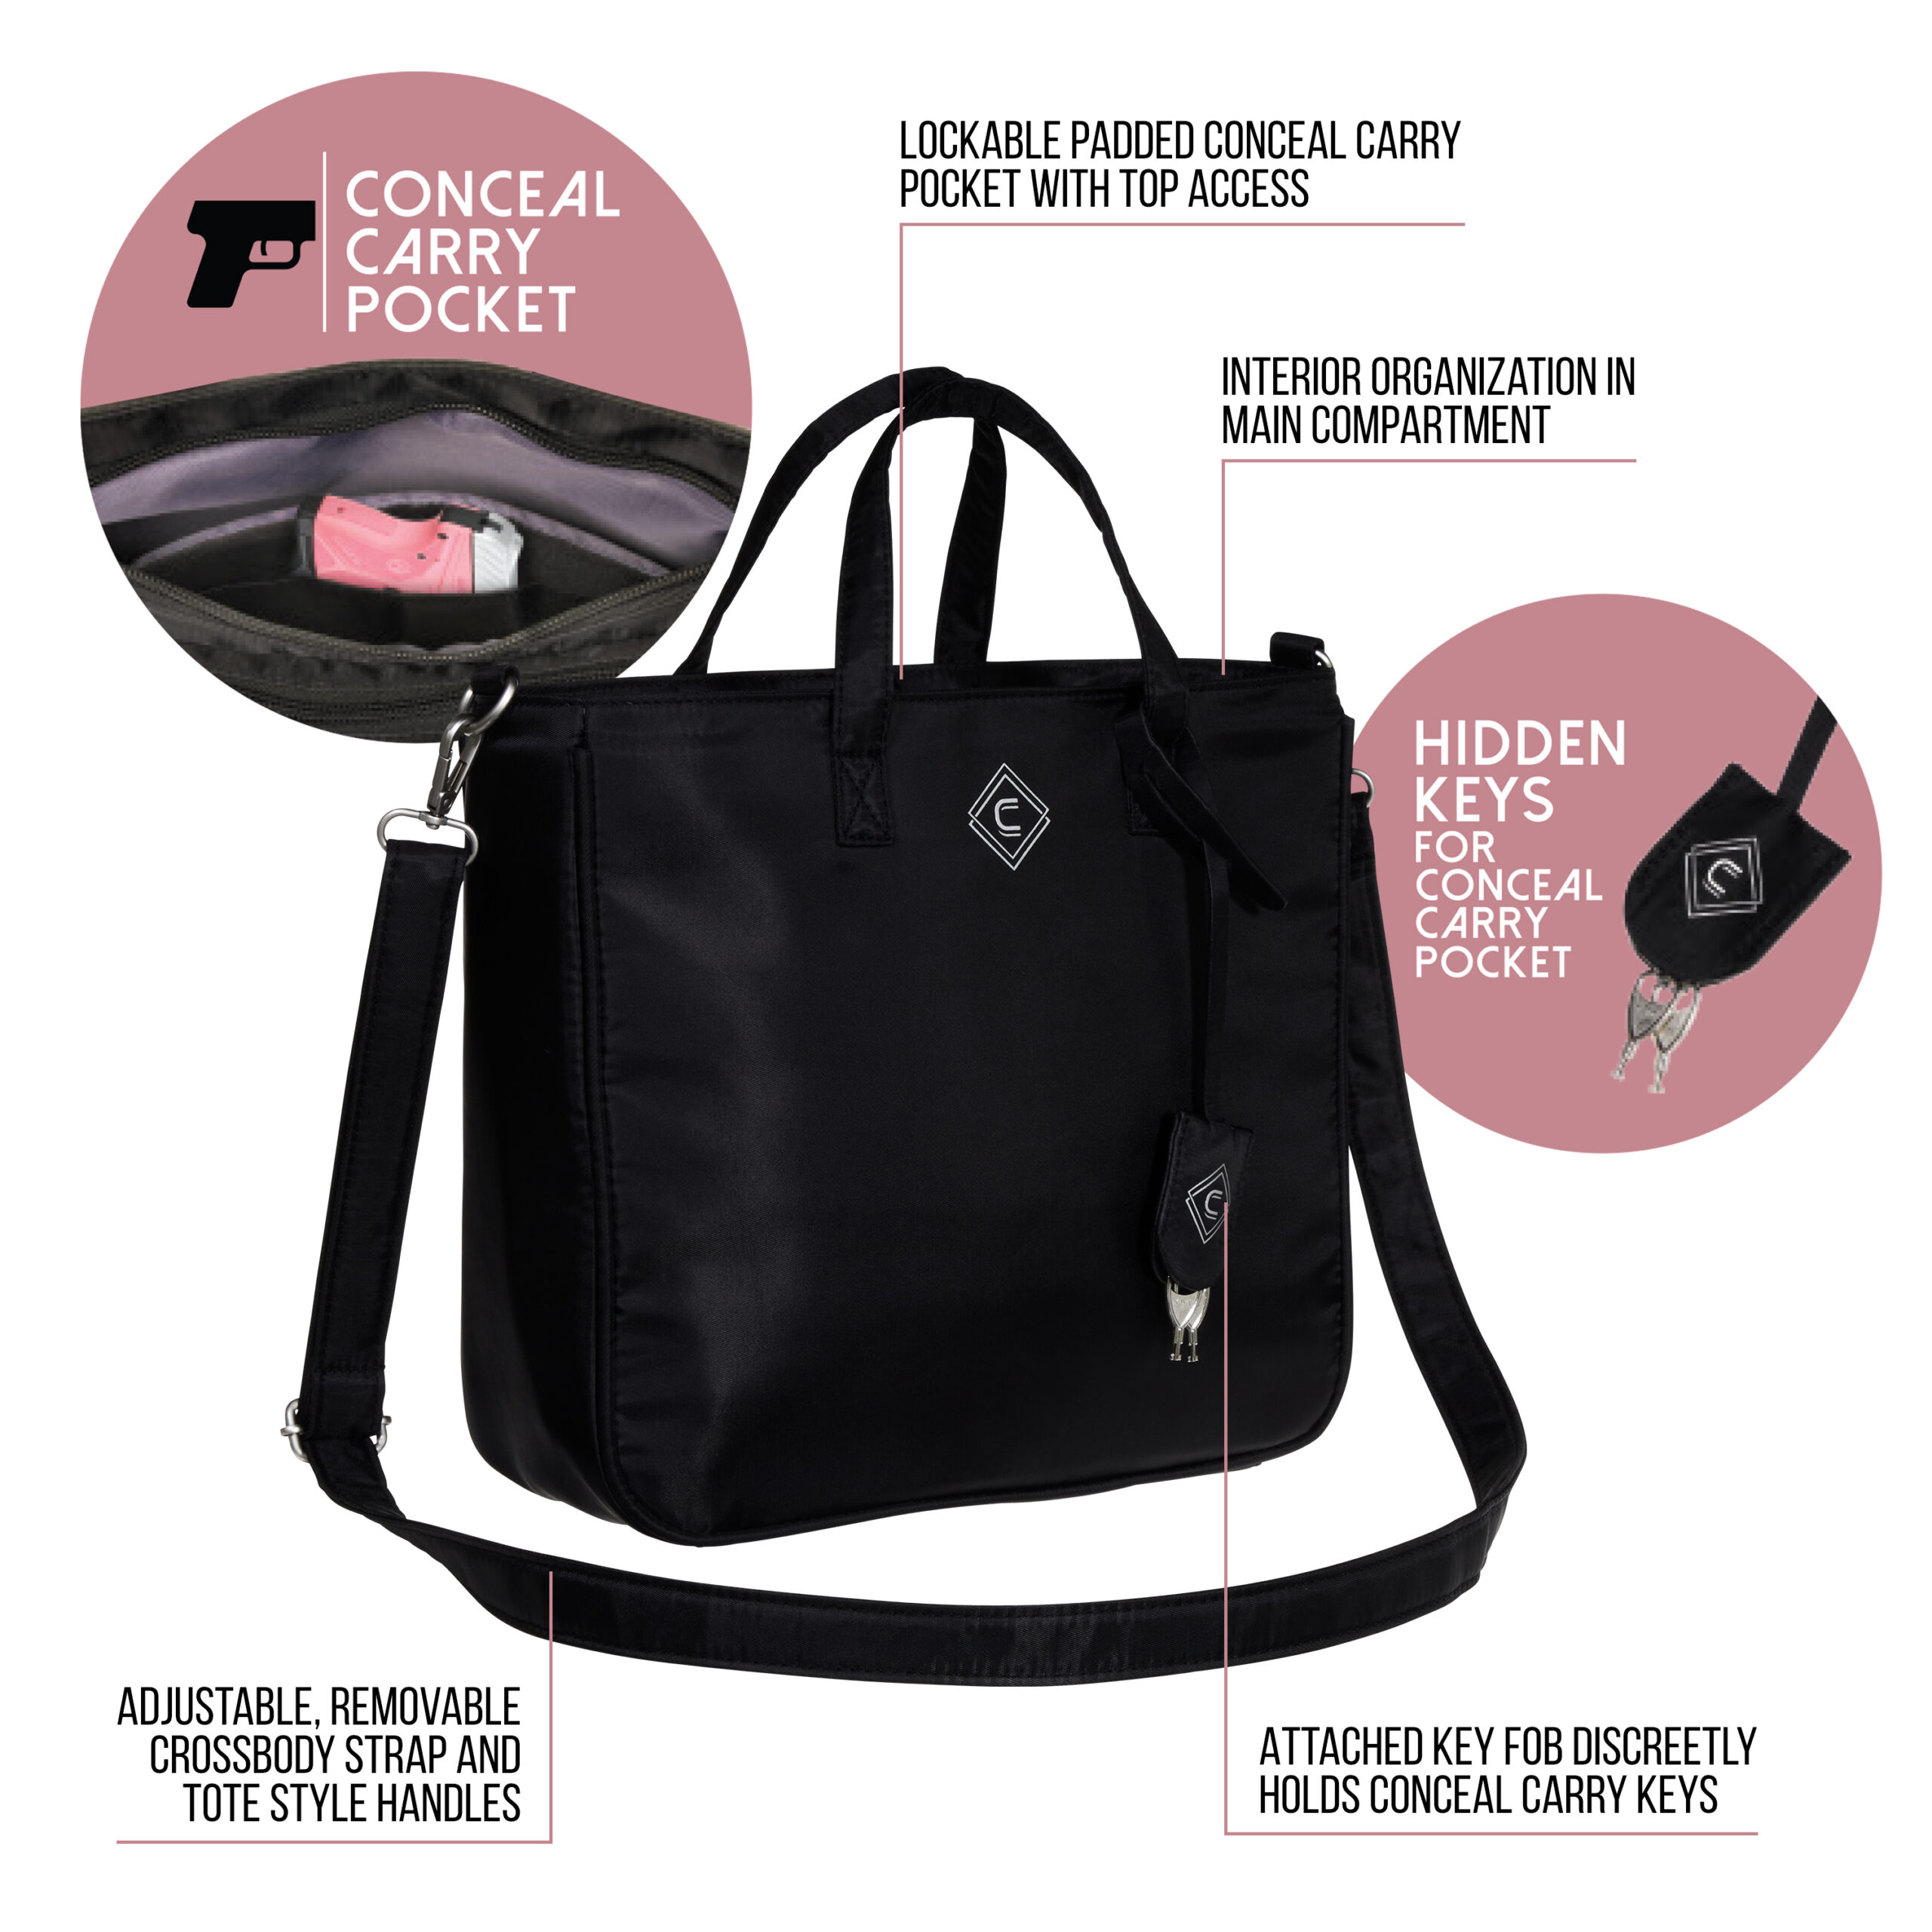 Laptop Hand-carry Bag - Corporate Gifts Supplier in Malaysia - Source EC